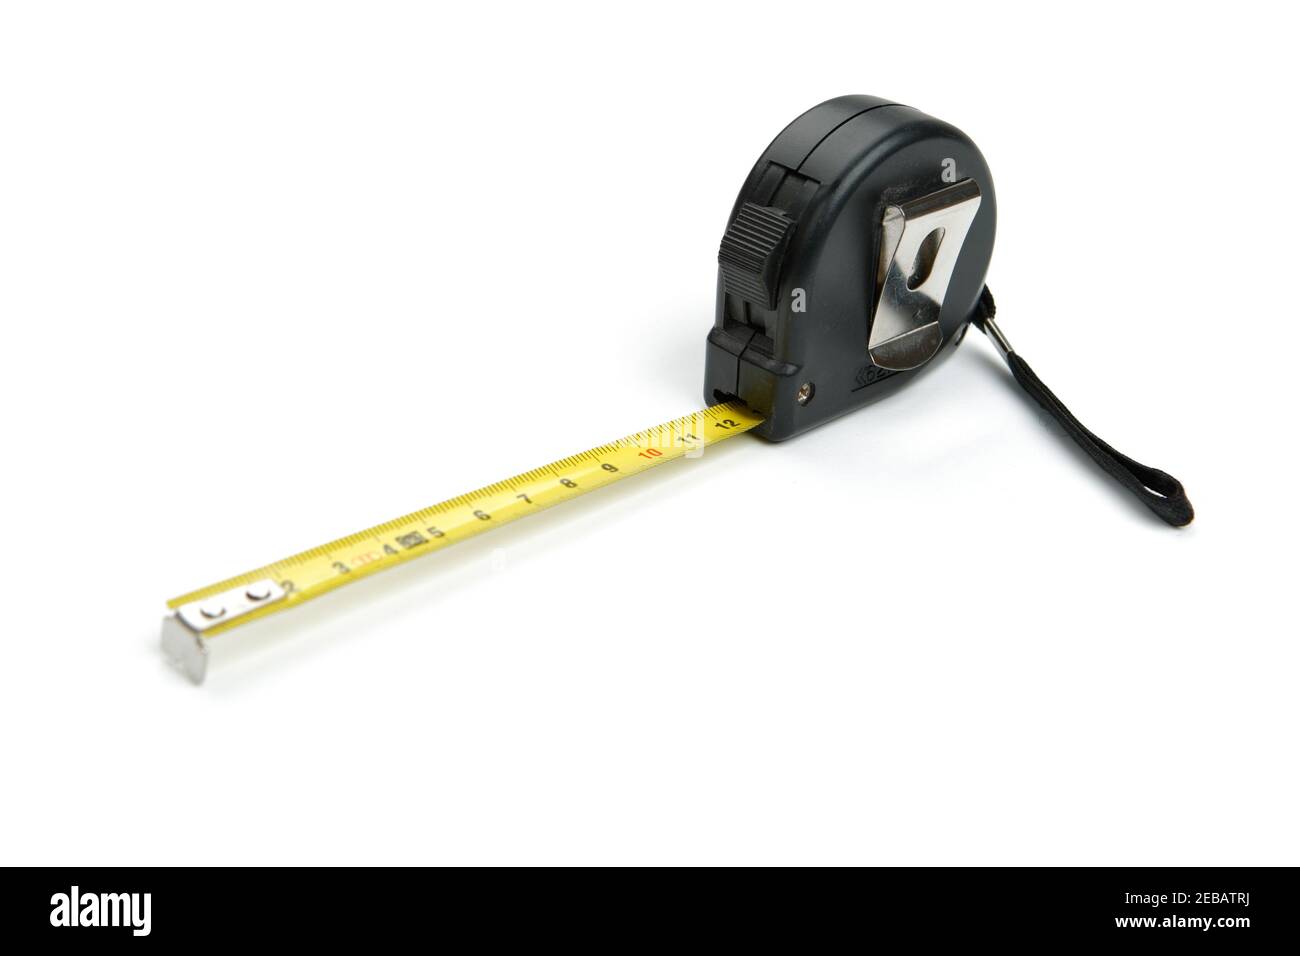 https://c8.alamy.com/comp/2EBATRJ/black-tape-measure-unrolled-or-measuring-tape-cut-out-and-isolated-on-white-background-2EBATRJ.jpg